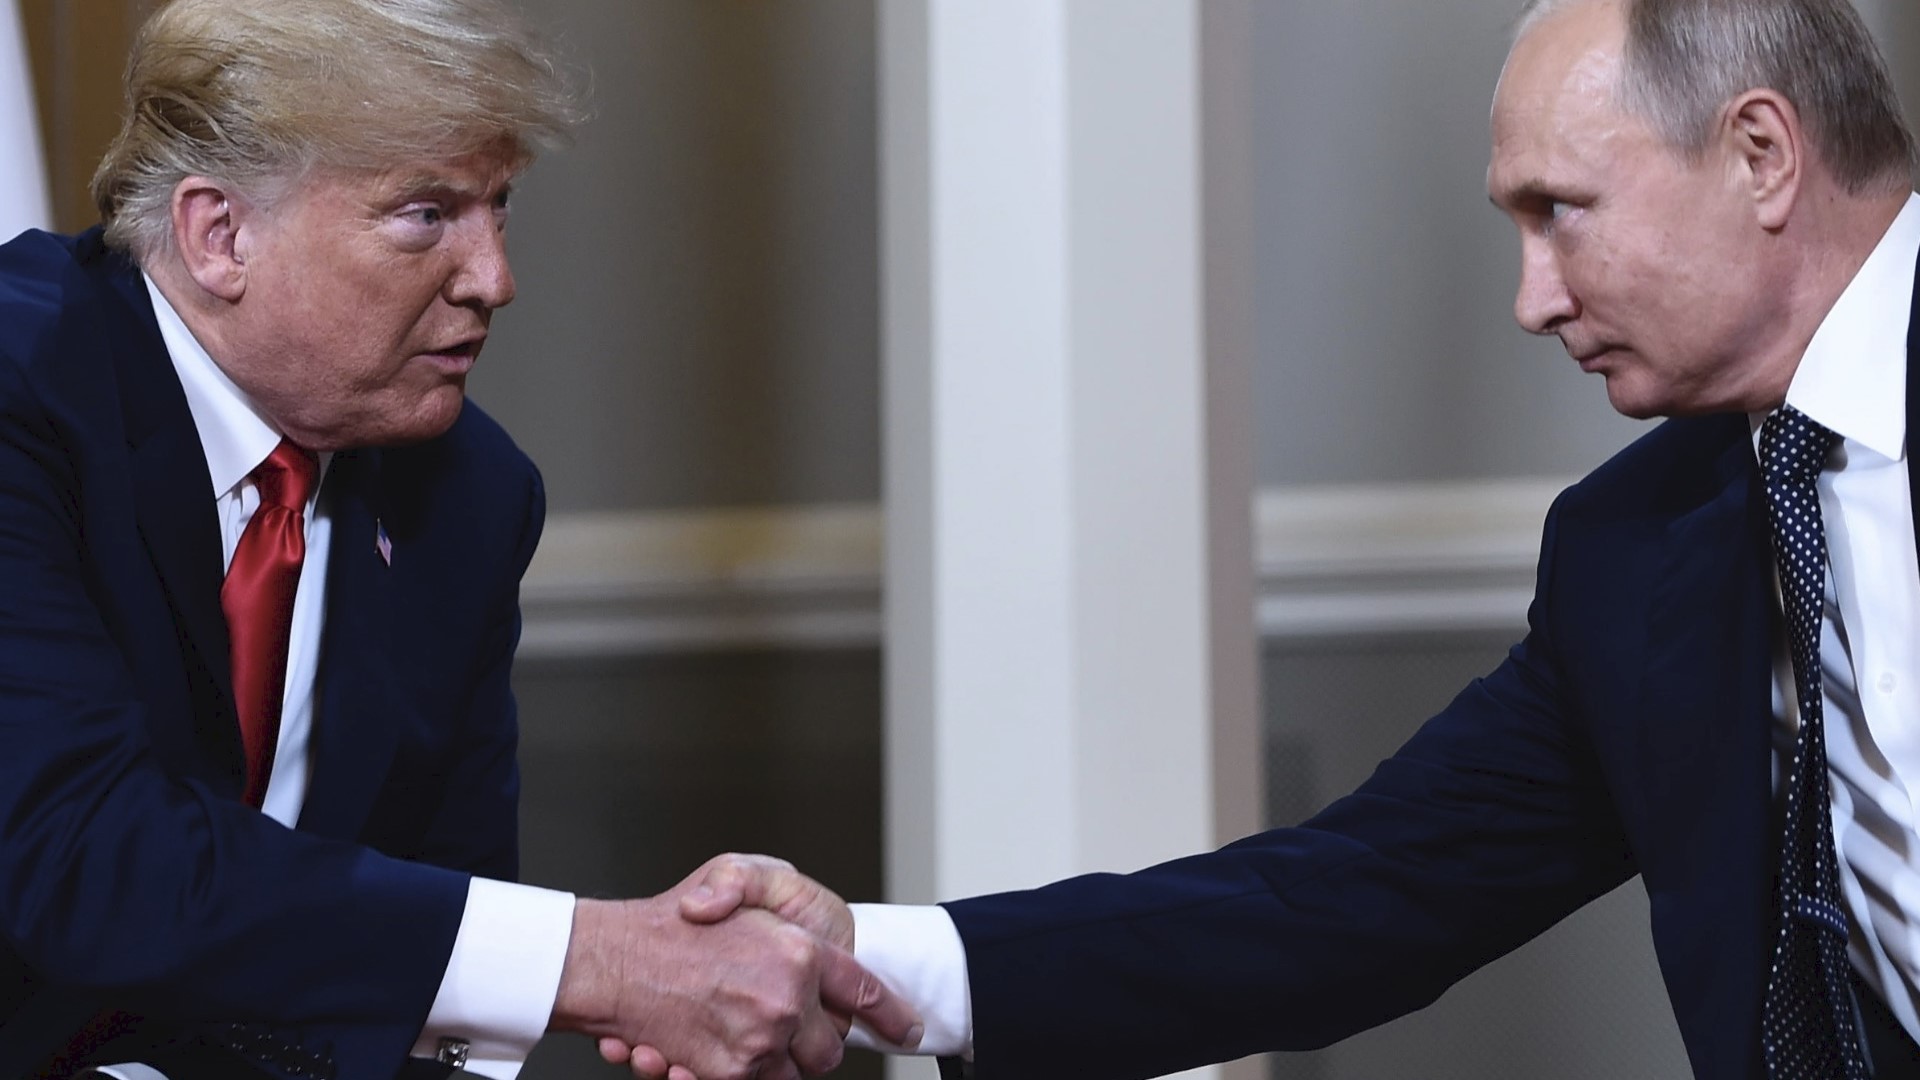 Vladimir Putin joked that the U.S. would see further meddling from the Kremlin in the upcoming 2020 election. Veuer's Justin Kircher has the story.